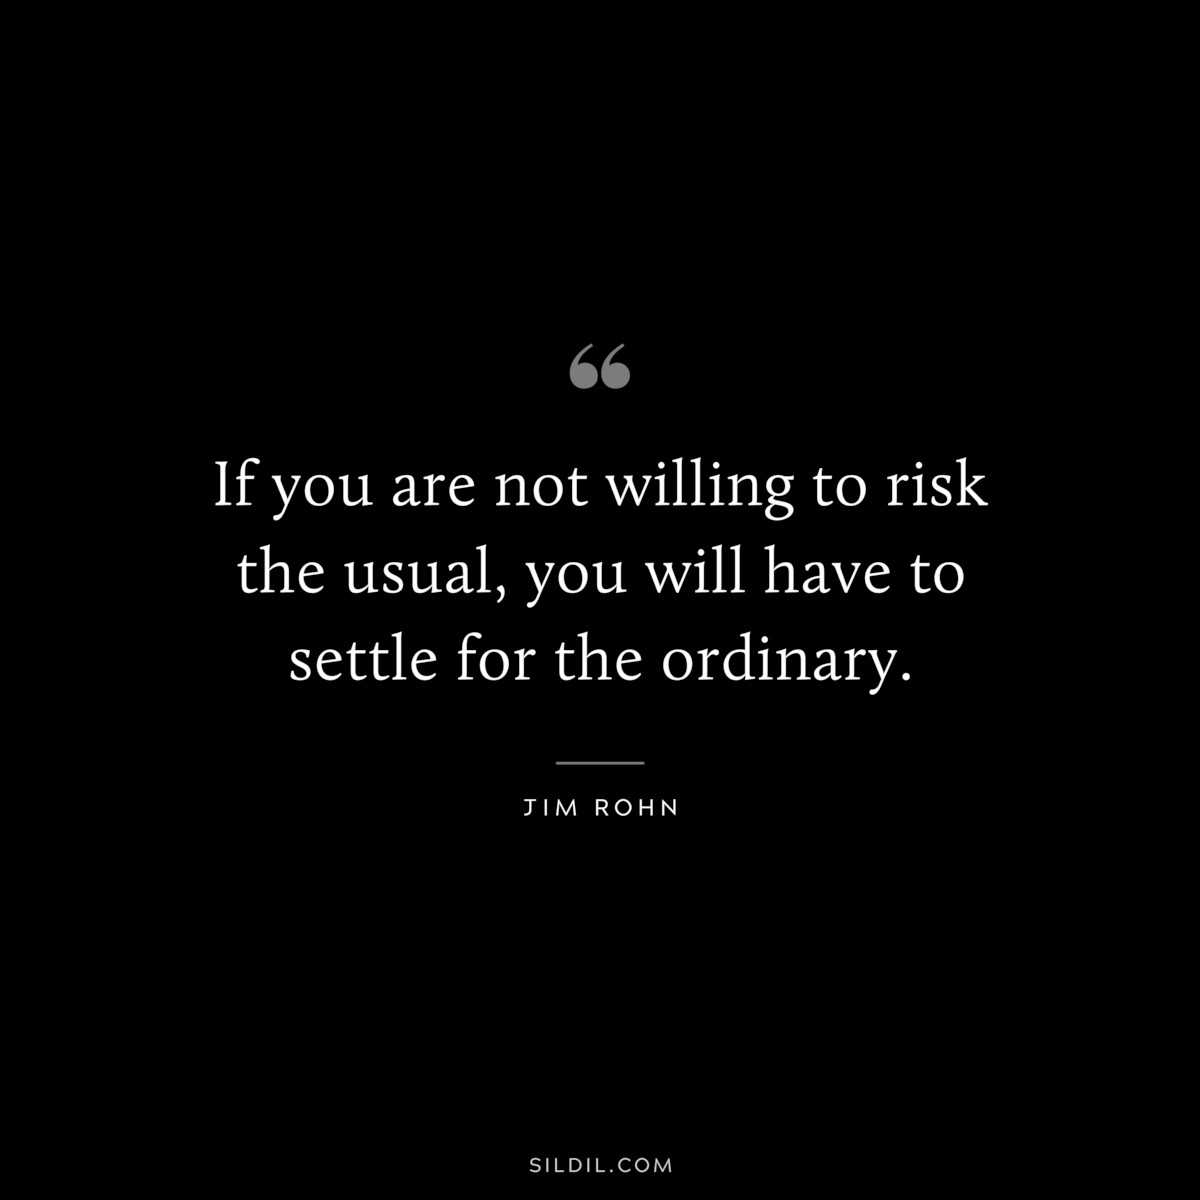 If you are not willing to risk the usual, you will have to settle for the ordinary. ― Jim Rohn